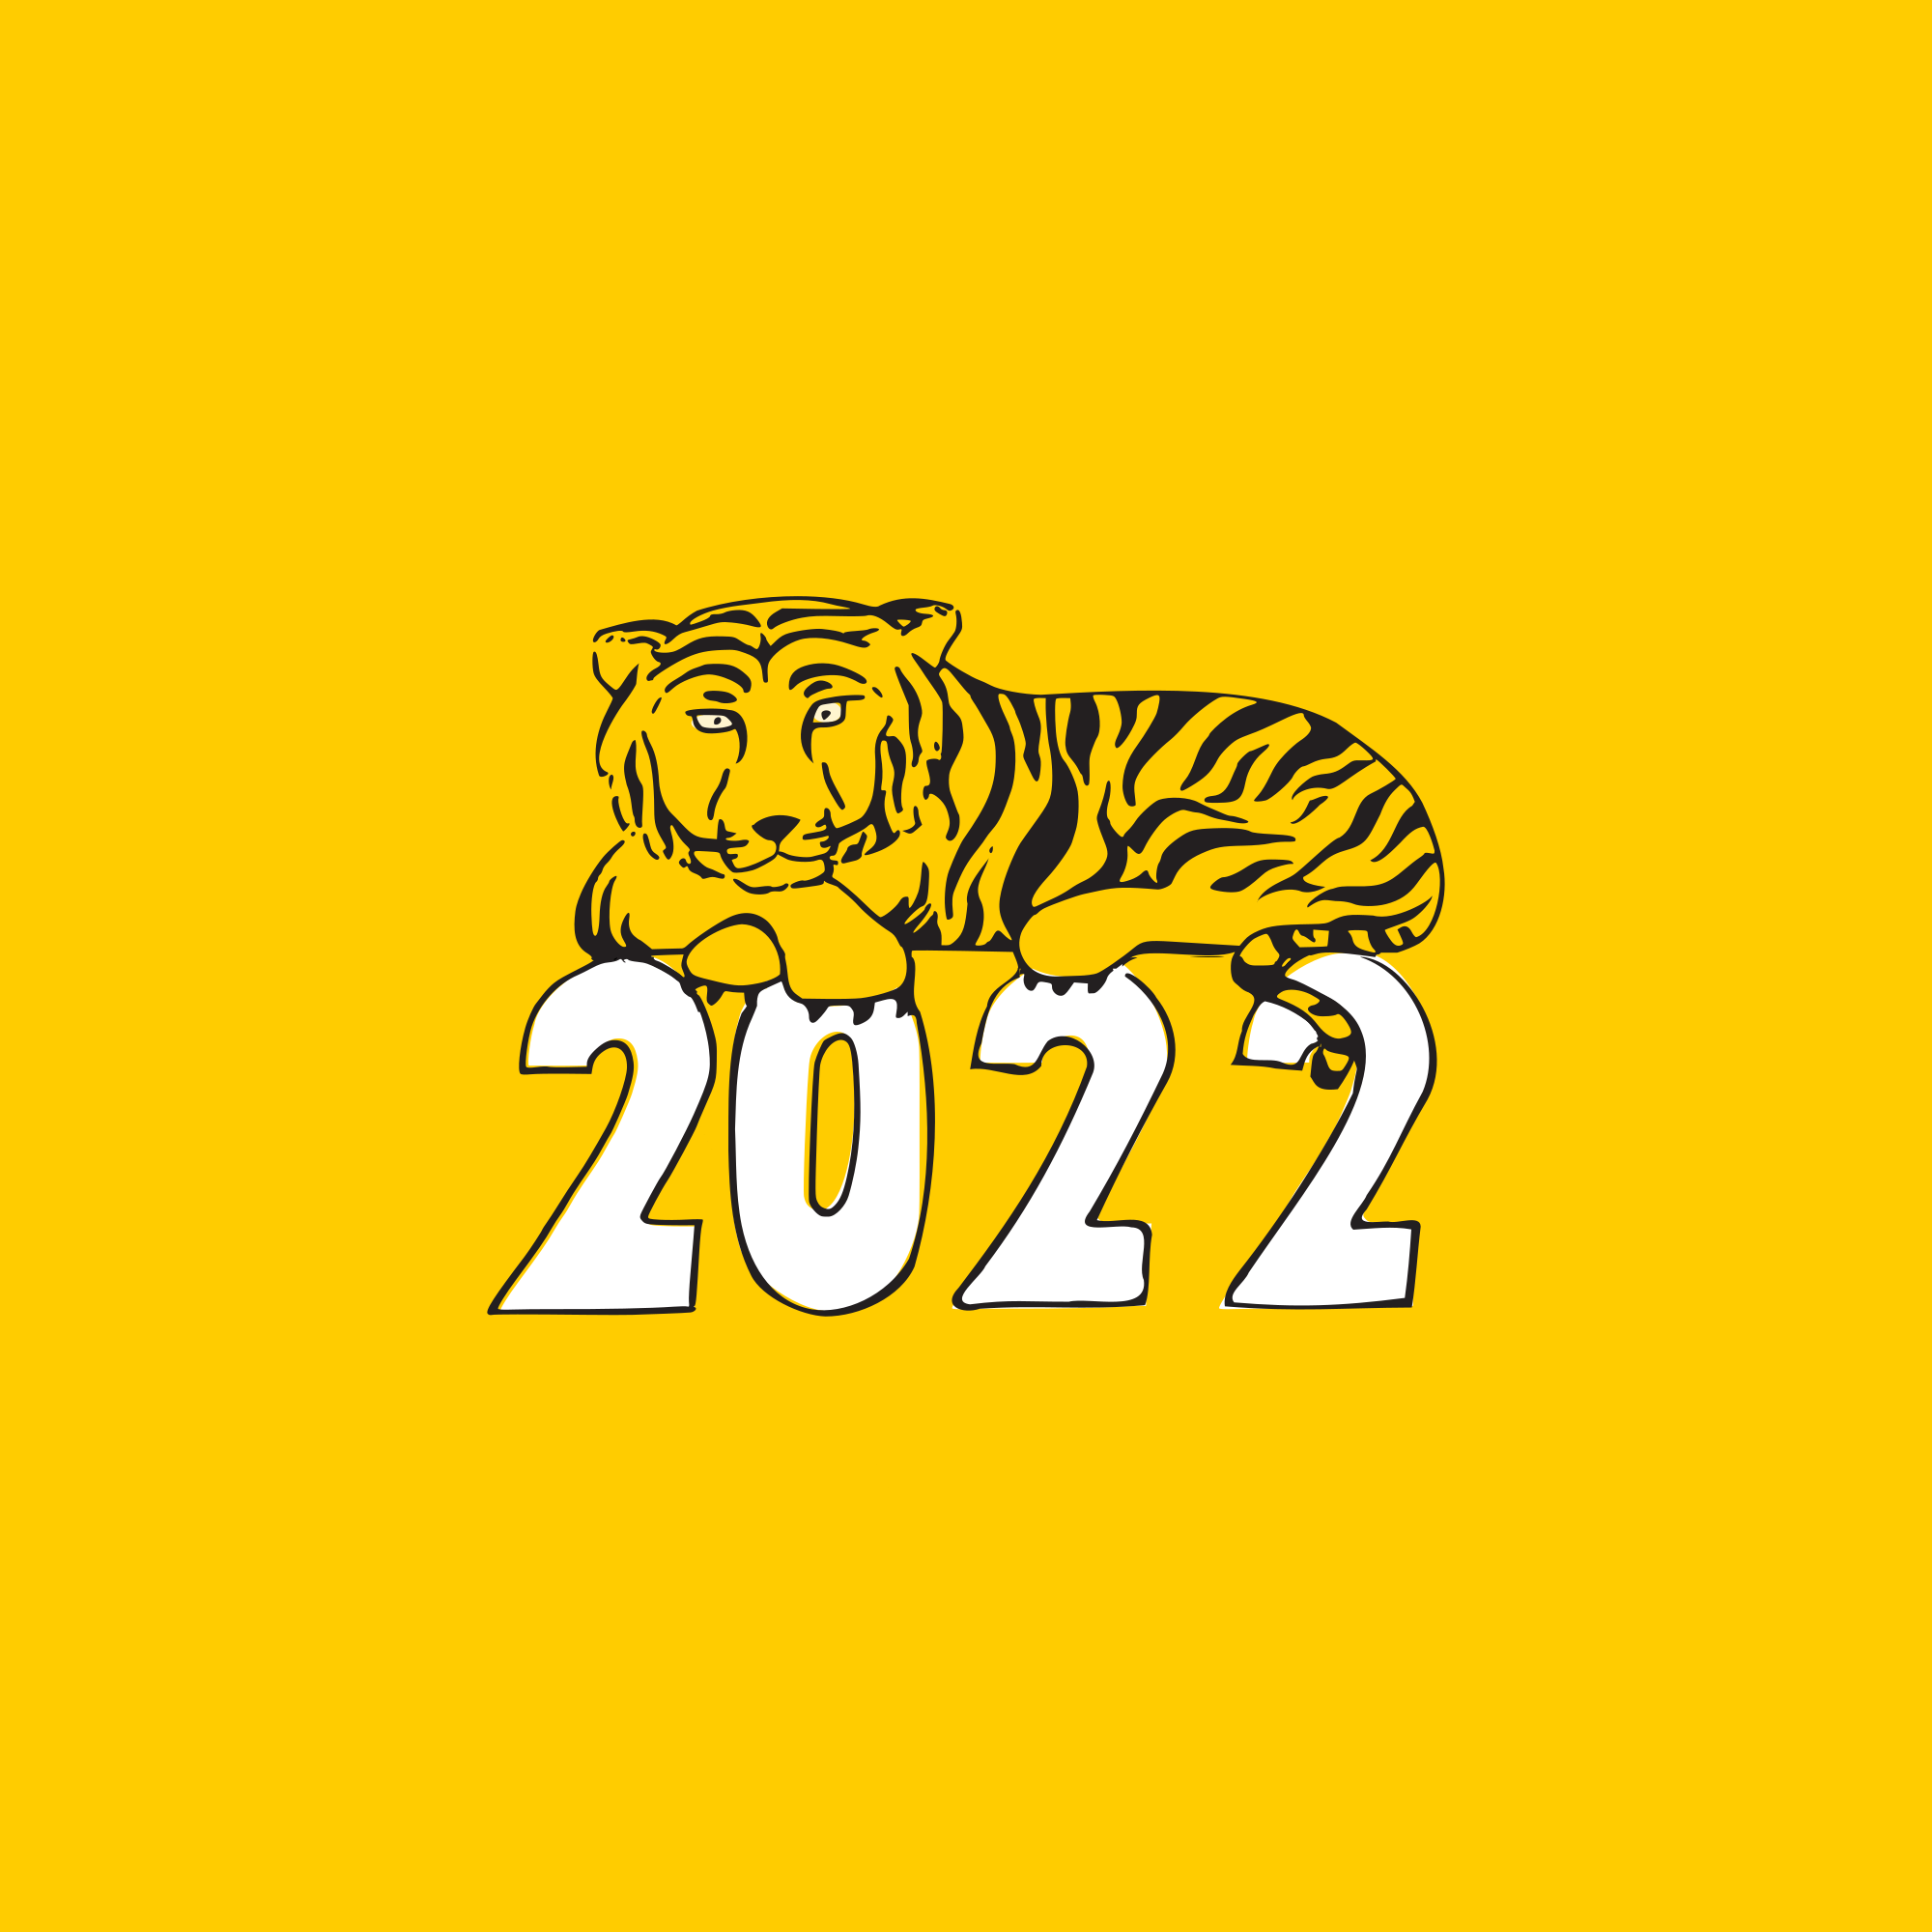 2022, the year of the tiger